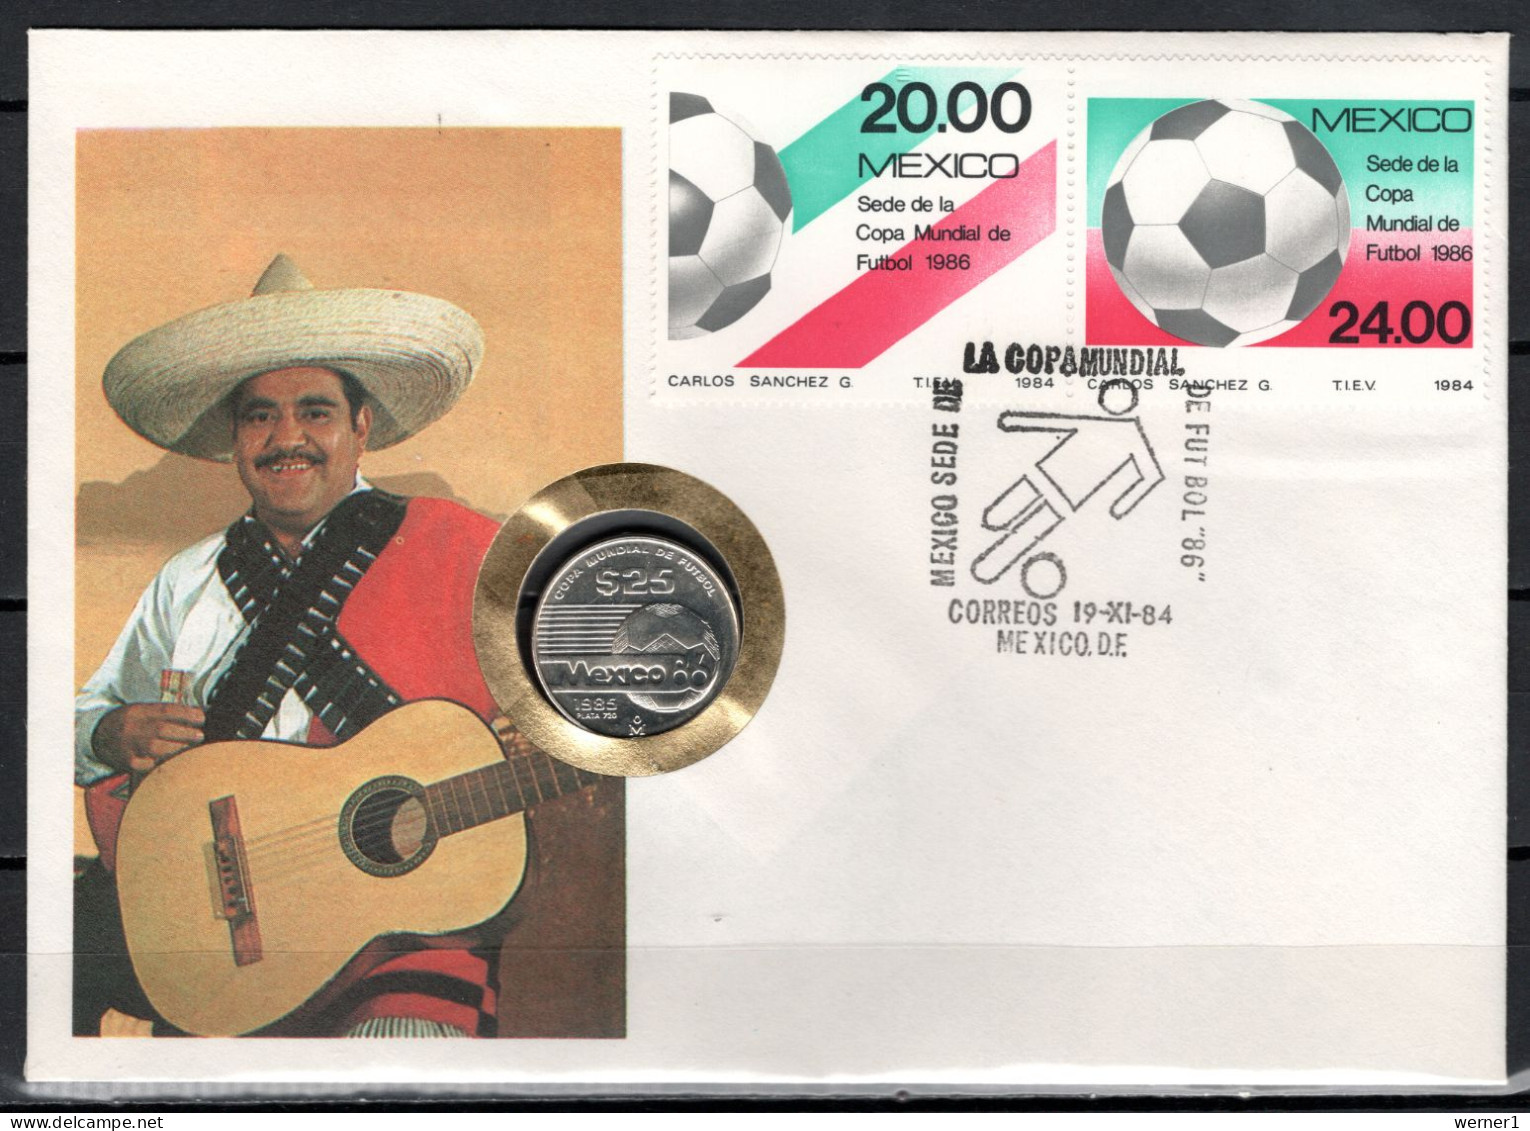 Mexico 1984 Football Soccer World Cup Numismatic Cover With 25 Peso Silver Coin - 1986 – Mexico